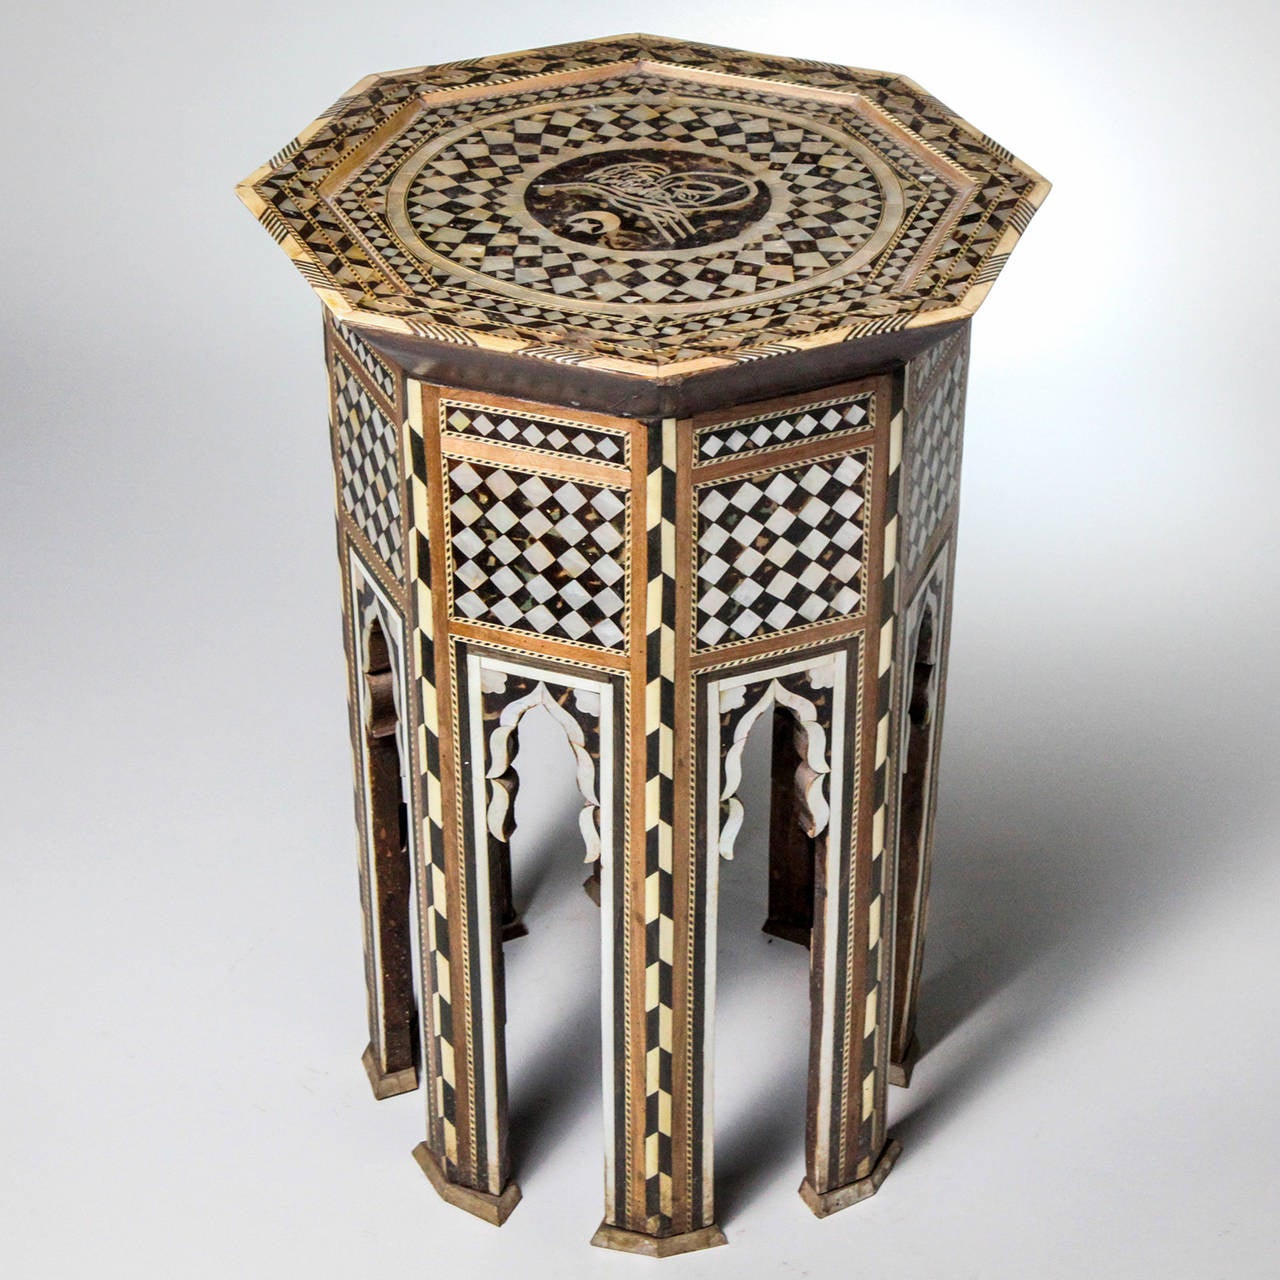 Moroccan Syrian Inlaid Table